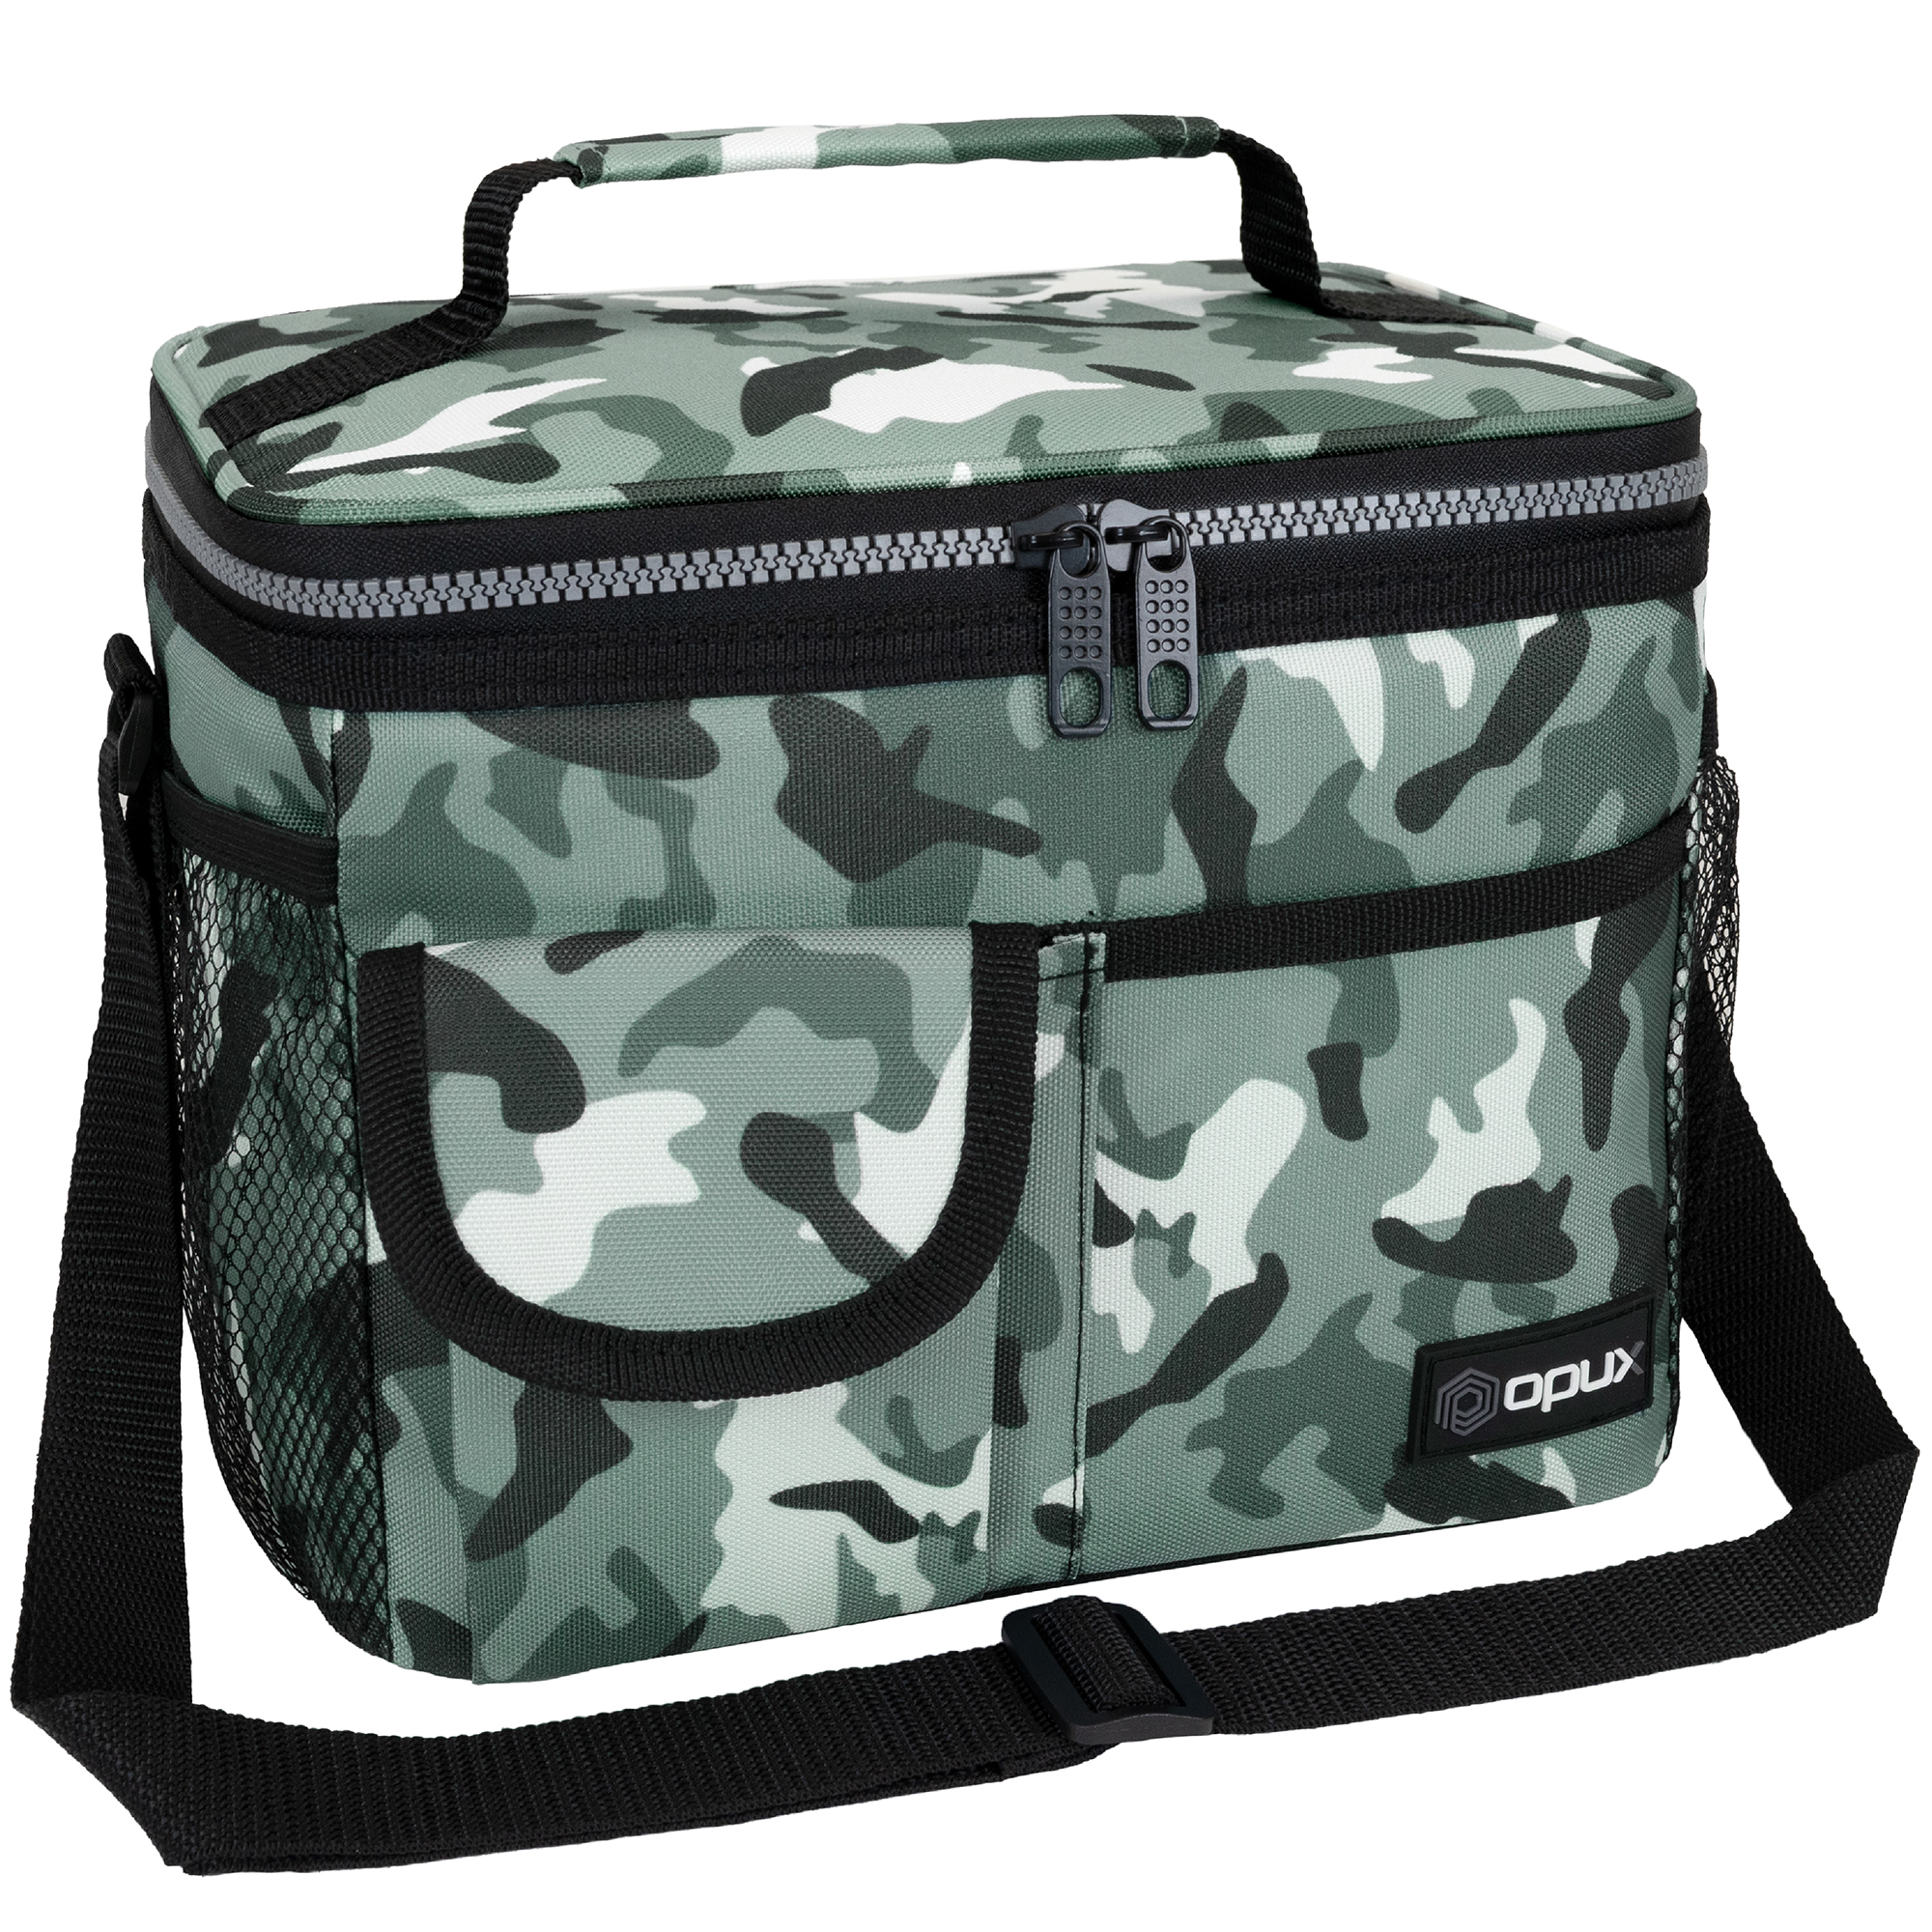 OPUX Insulated Lunch Bag for Men Women, Leakproof Thermal Lunch Box Work School, Soft Lunch Cooler Bag with Adjustable Shoulder Strap for Adult Kid Boy Girl, Reusable Lunch Pail, Camo Green - image 1 of 8